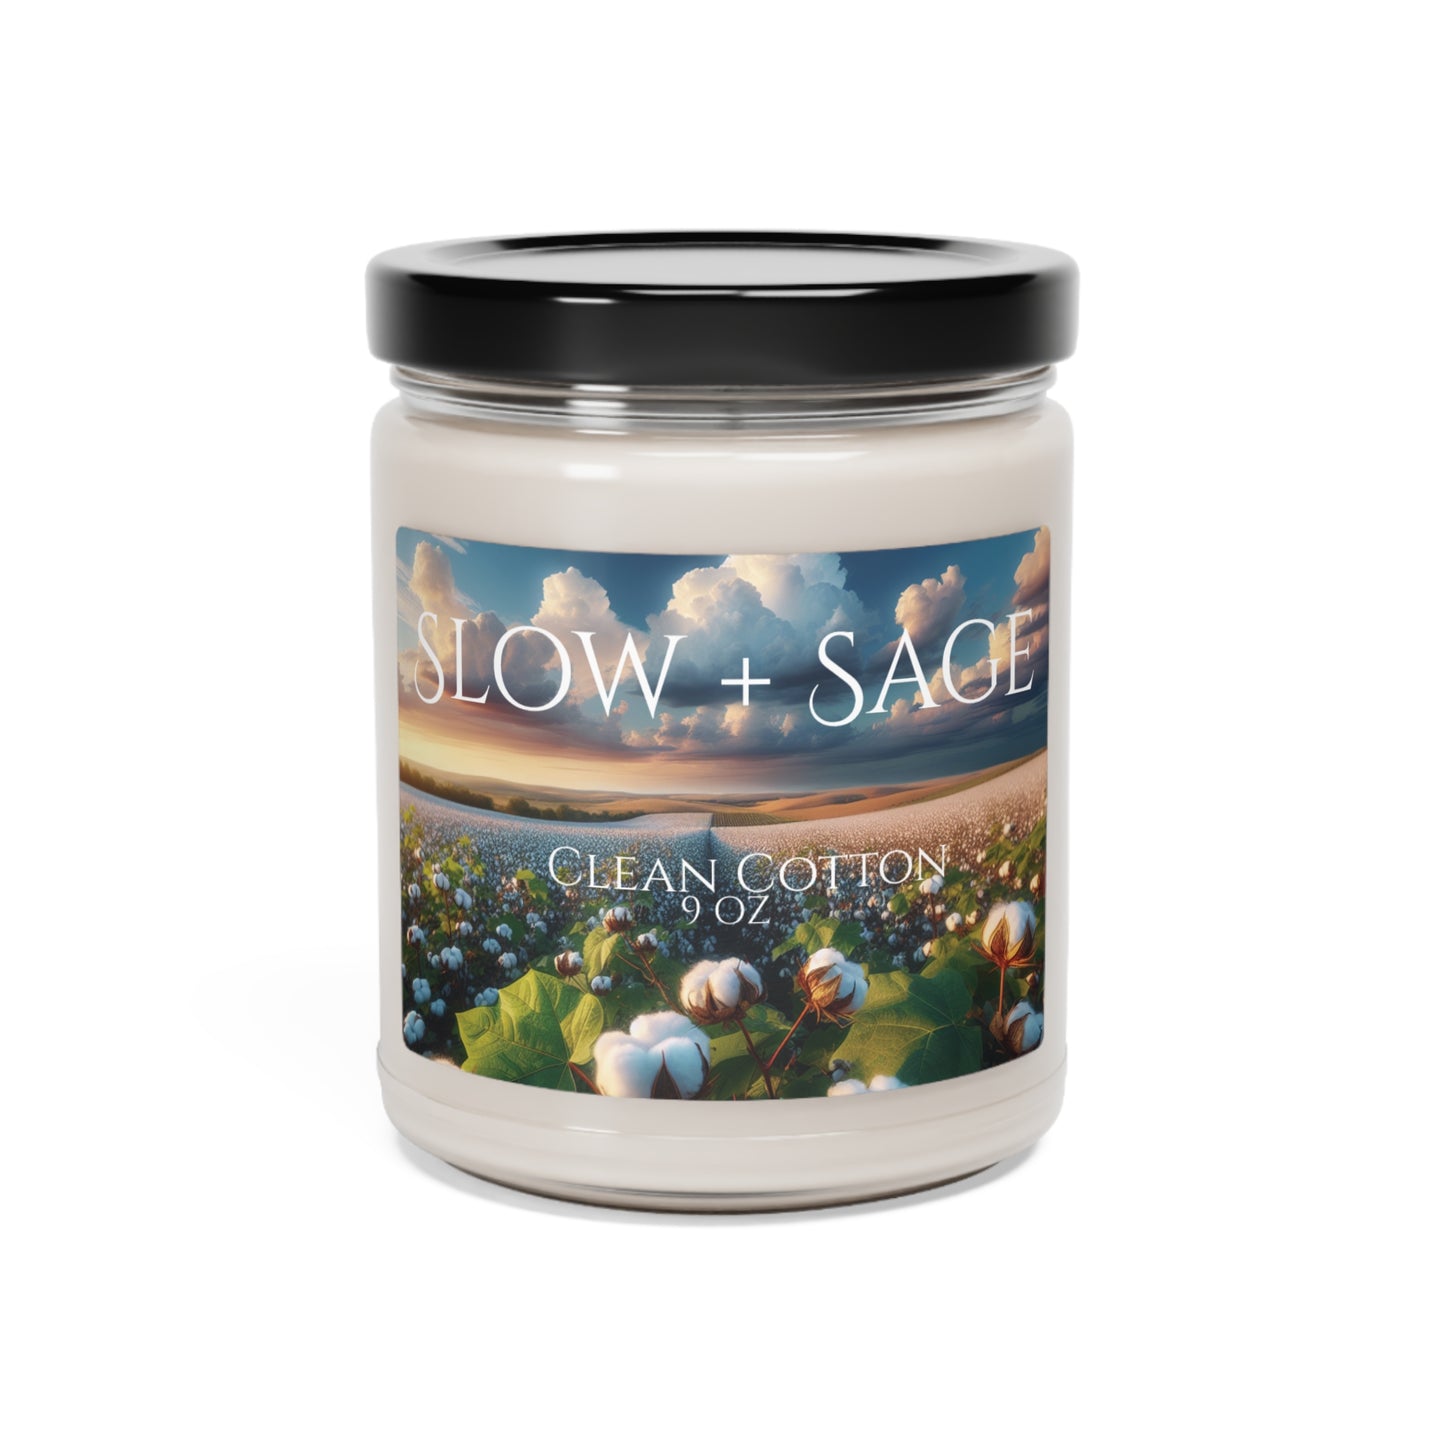 SLOW + SAGE Clean Cotton Scented Natural Soy Candle, 9oz (Go With The Slow)